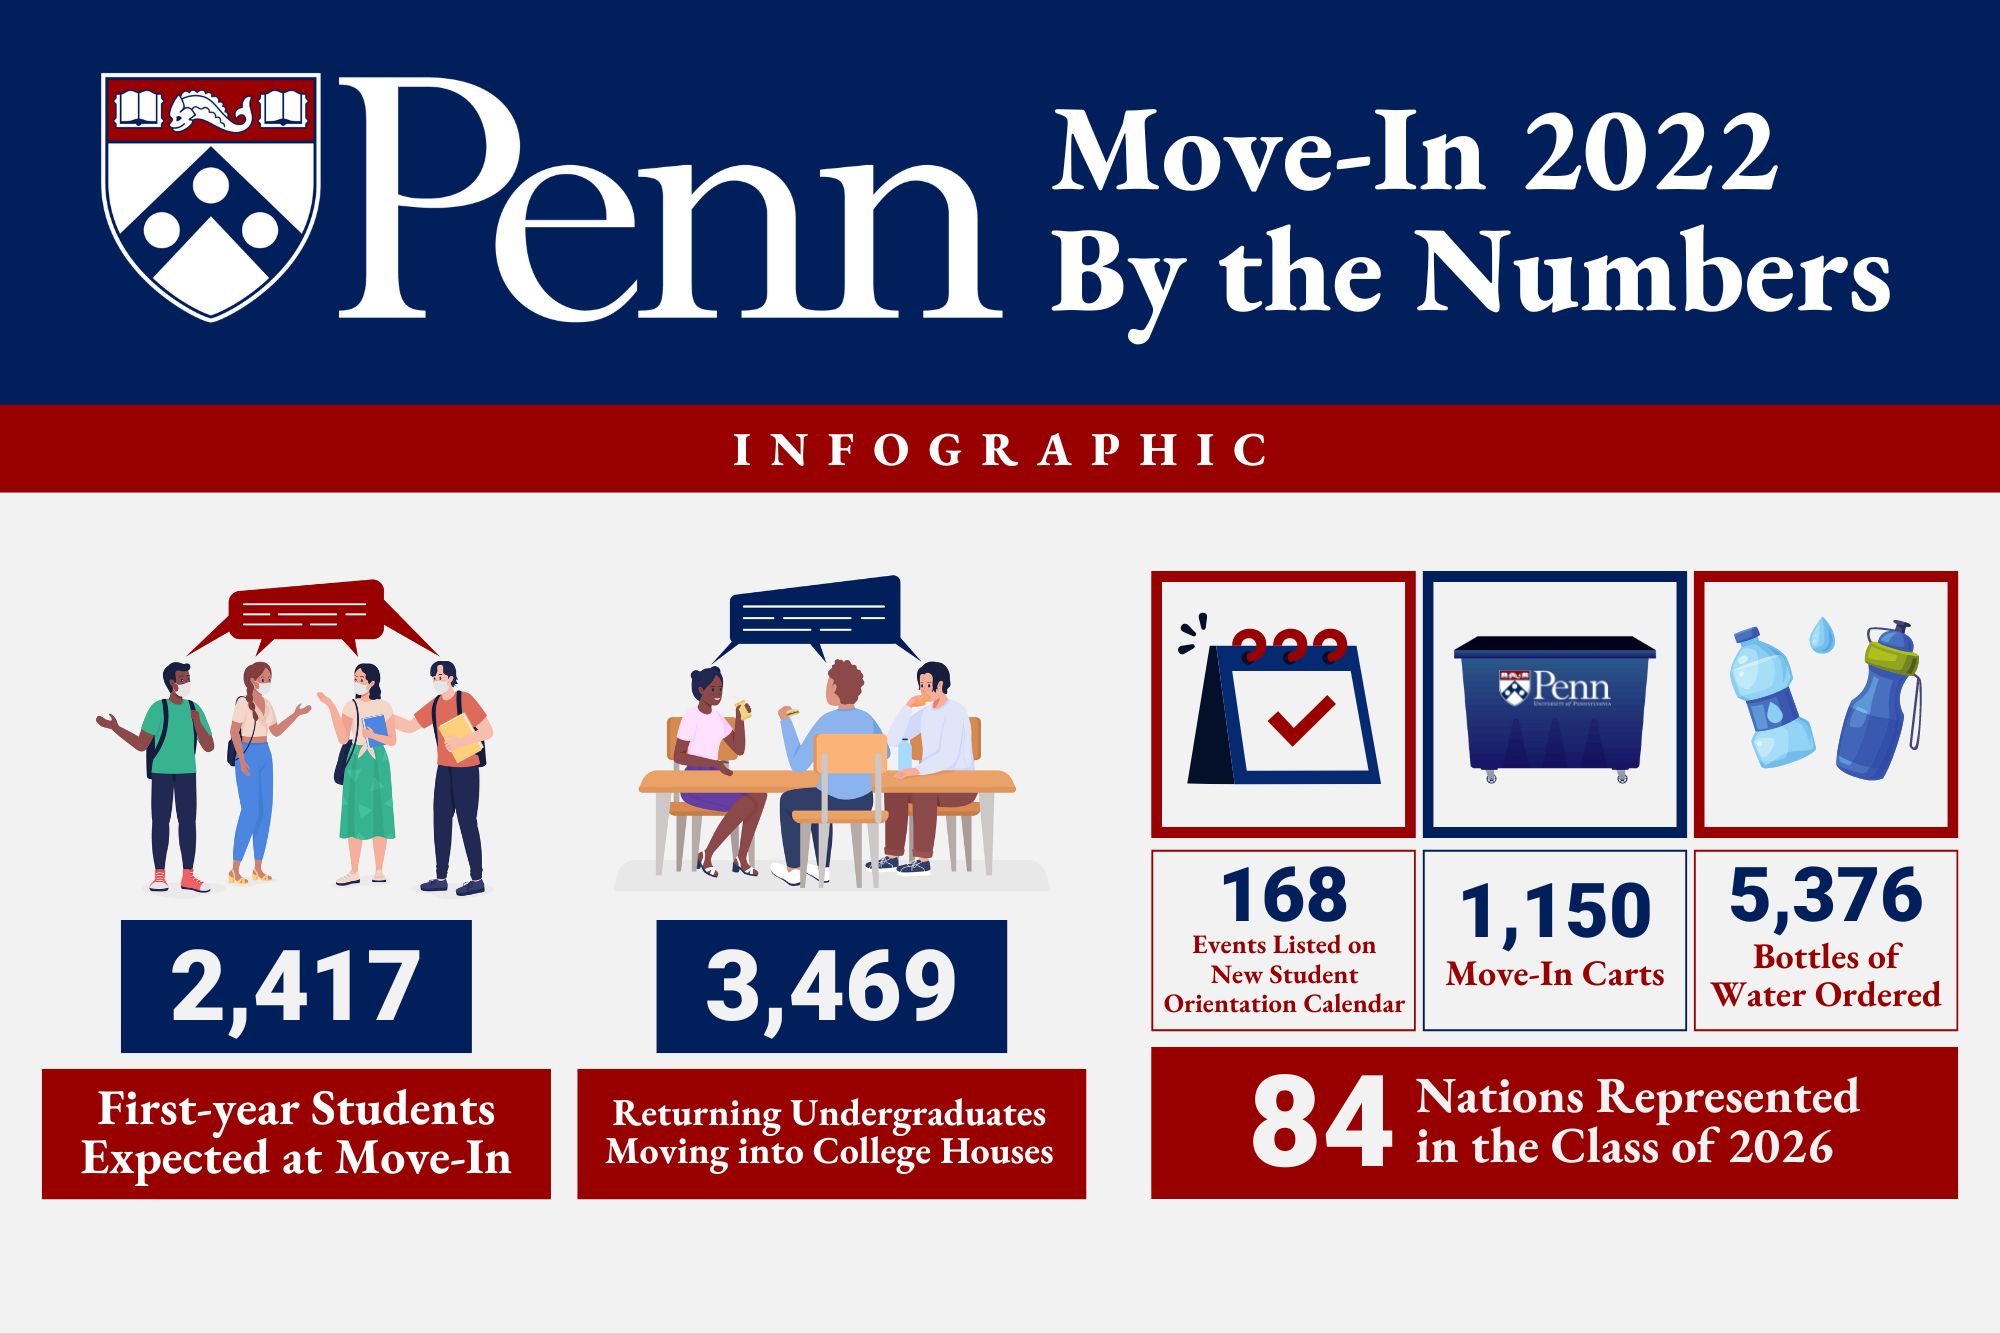 Move-In 2022 by the numbers 2,415 first-year students expected at move-in, 3469 returning undergraduates moving into college houses, 1168 events listed on new student orientation calendar, 1,150 move-in carts, 5,376 bottles of water ordered, 84 nations represented in the class of 2026